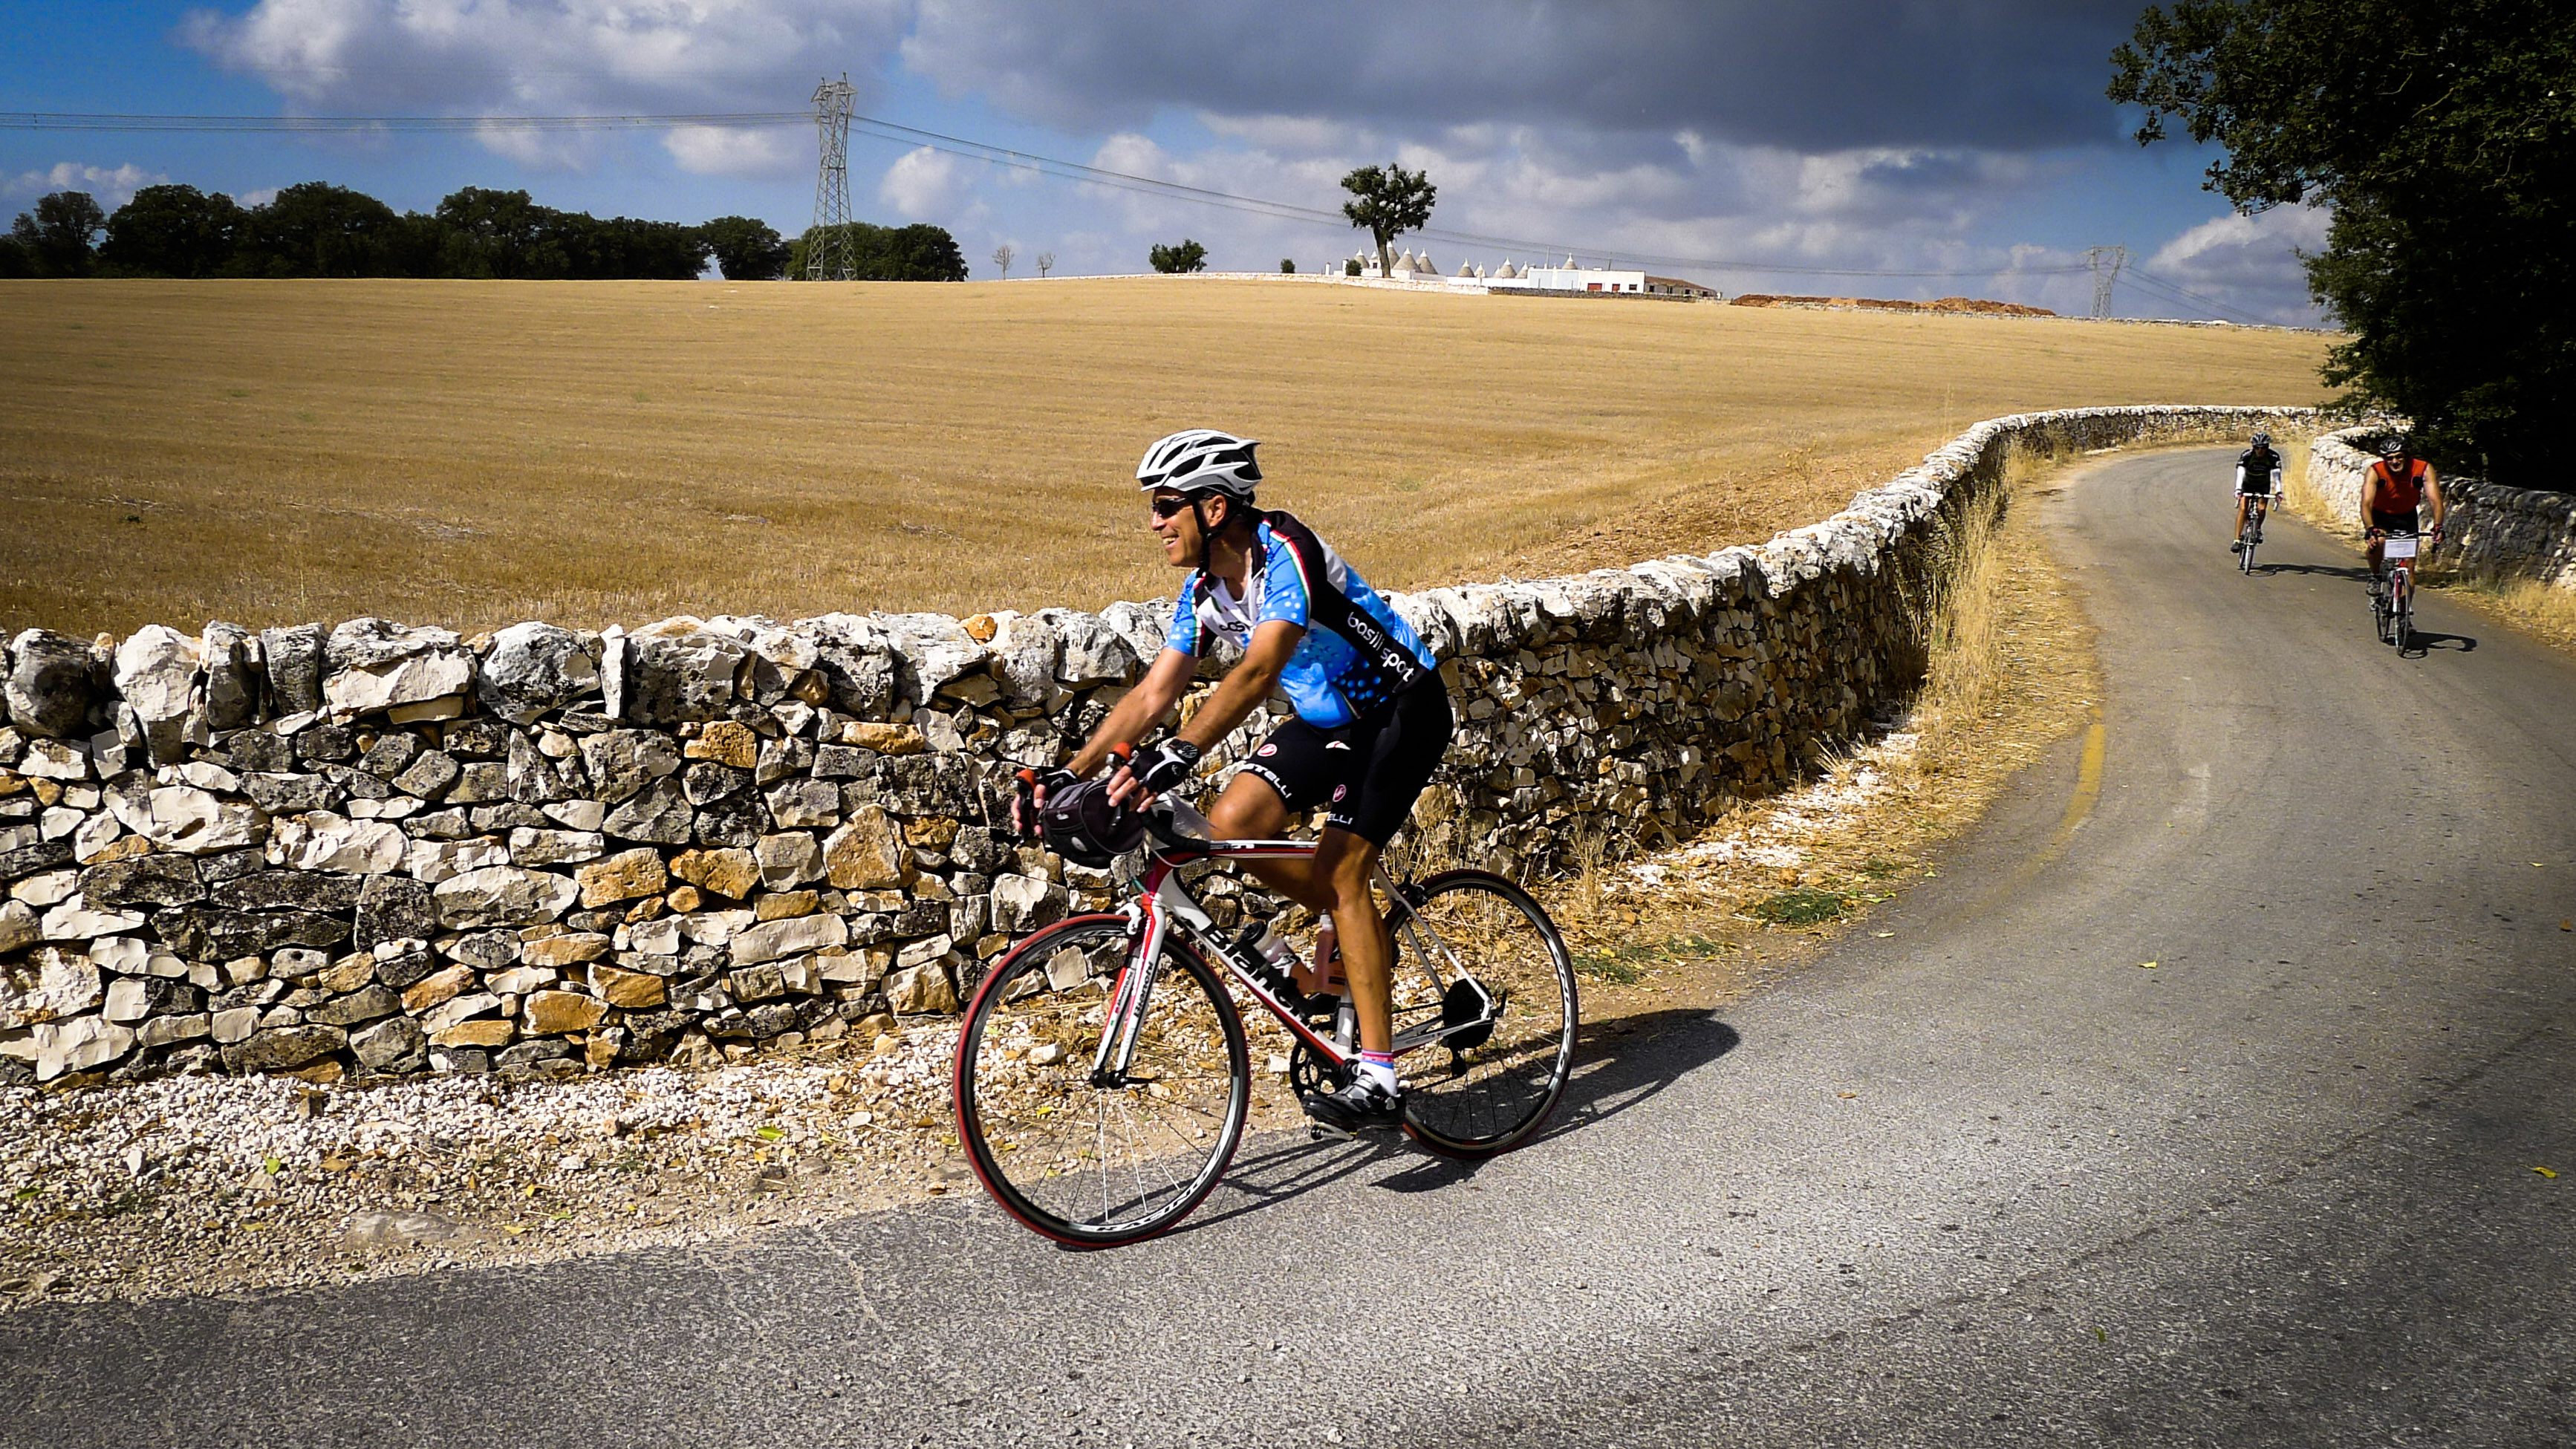 Riding the beautiful country lanes in Puglia